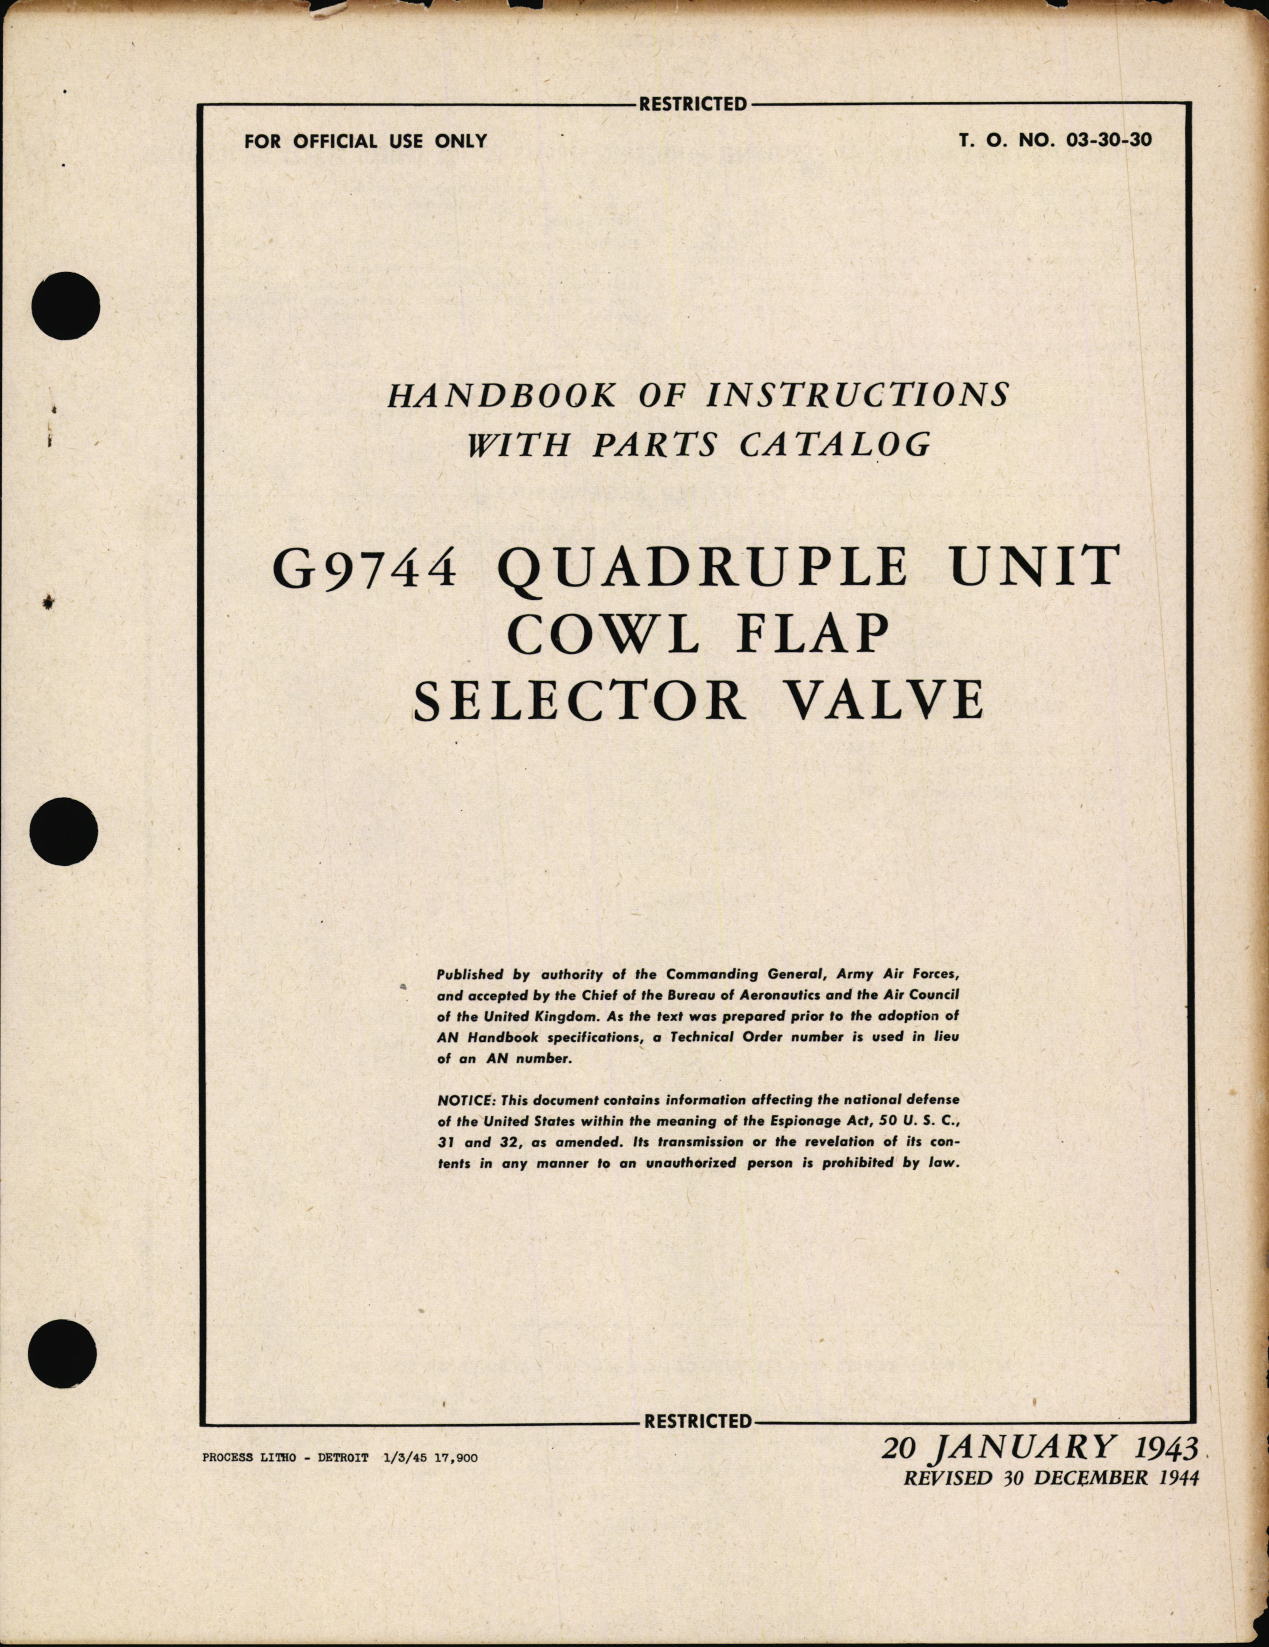 Sample page 1 from AirCorps Library document: Handbook of Instructions with Parts Catalog for G9744 Quadruple Unit Cowl Flap Selector Valve